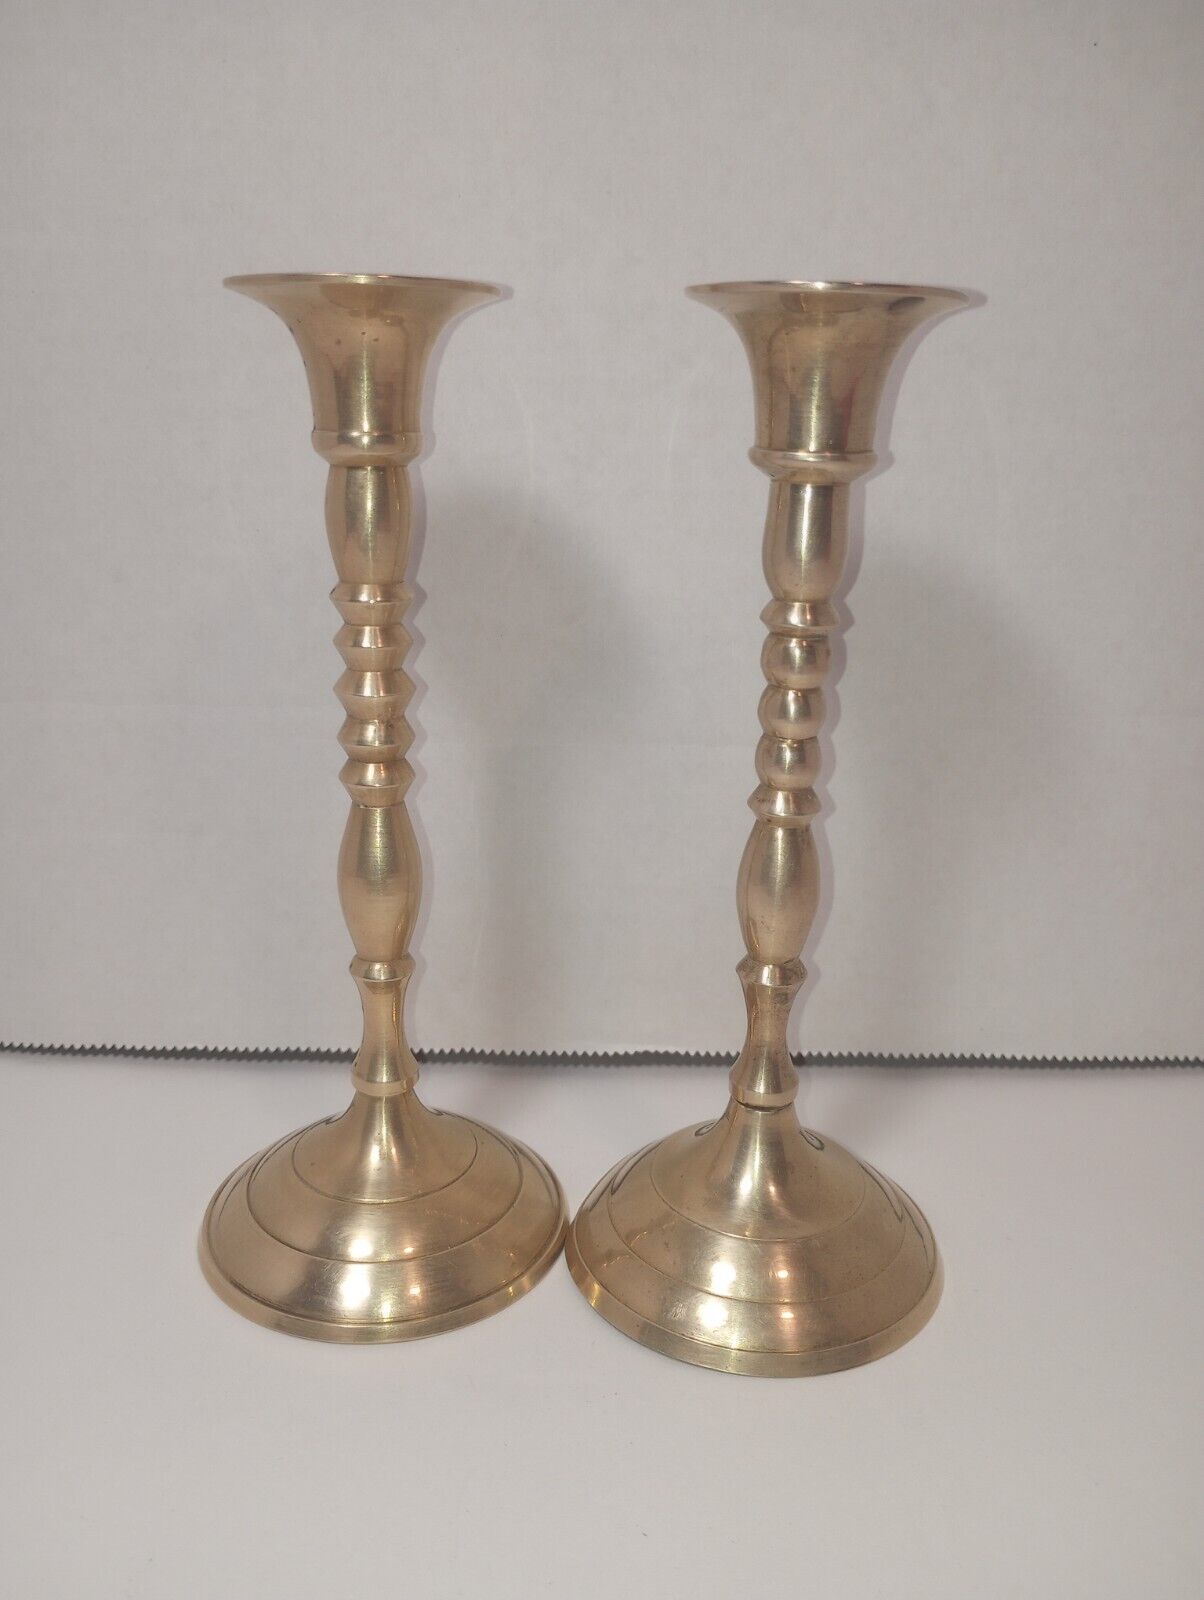 Pair Of 6 Inch Tall Elegant Brass Candlestick Holders 